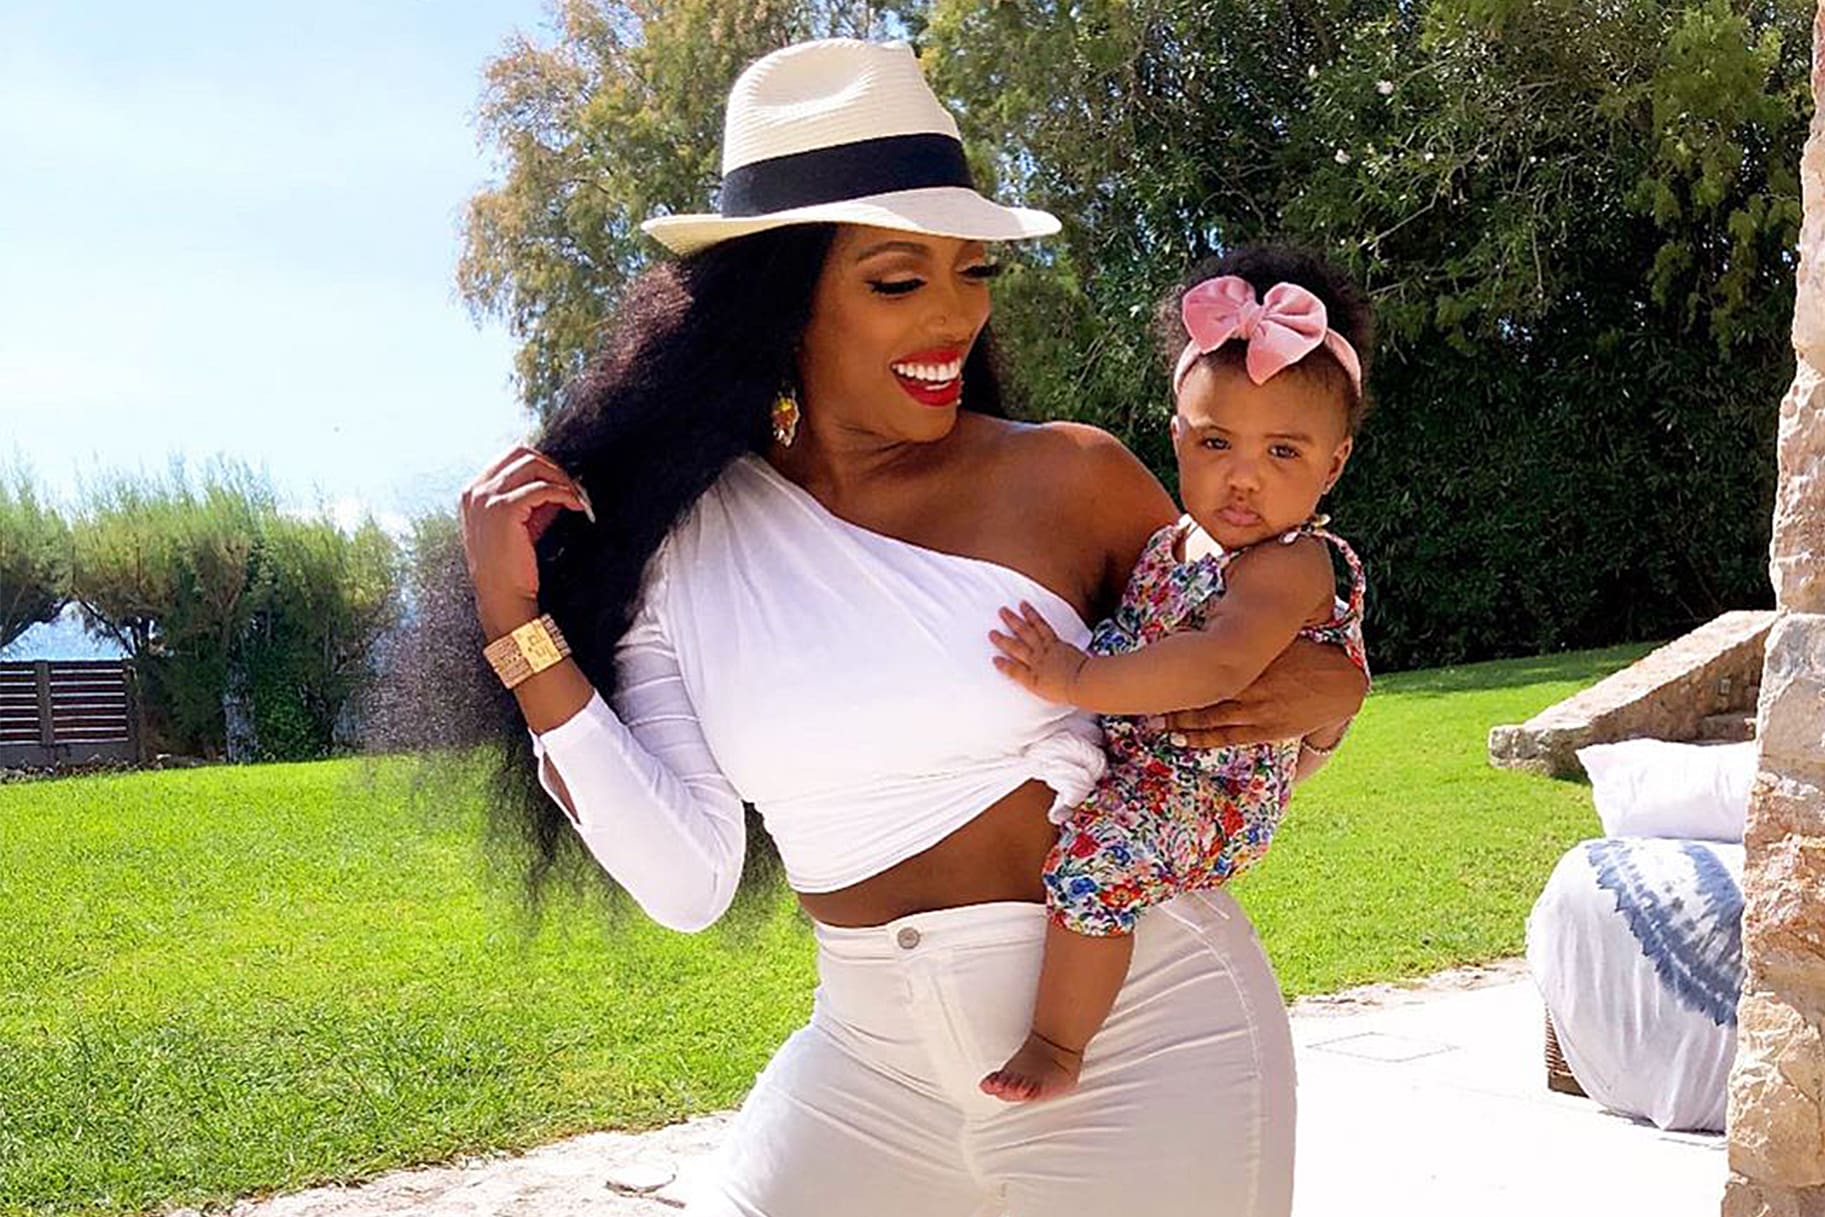 Porsha Williams Calls Baby Pilar Jhena A 'Weirdo' Like Her: Here's The Video That Triggered It All